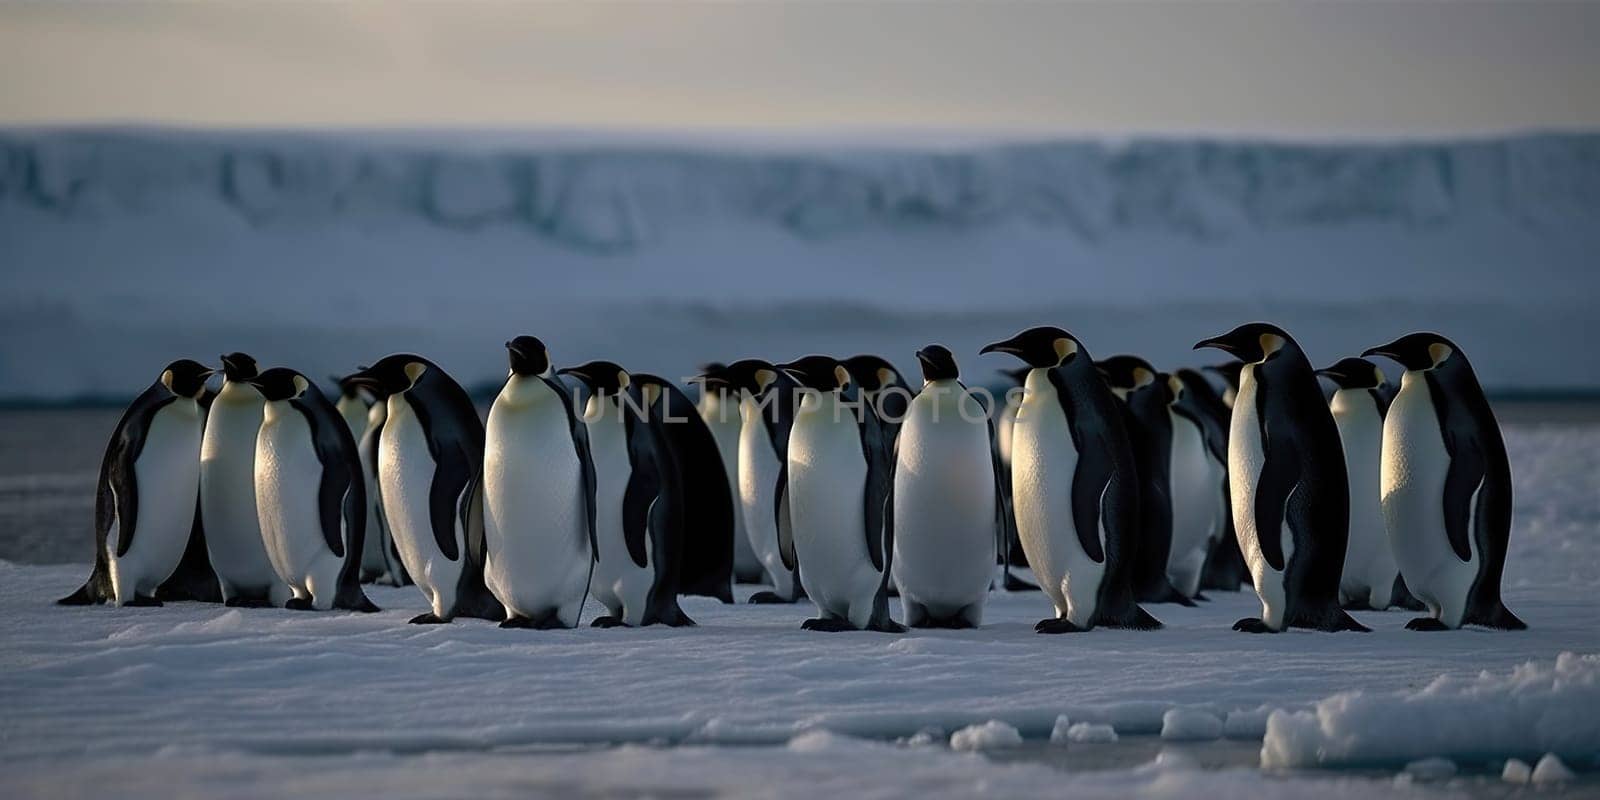 Large Royal Penguins Gather On An Ice Floe In The Ocean, World Of Fauna In Its Natural Habitat